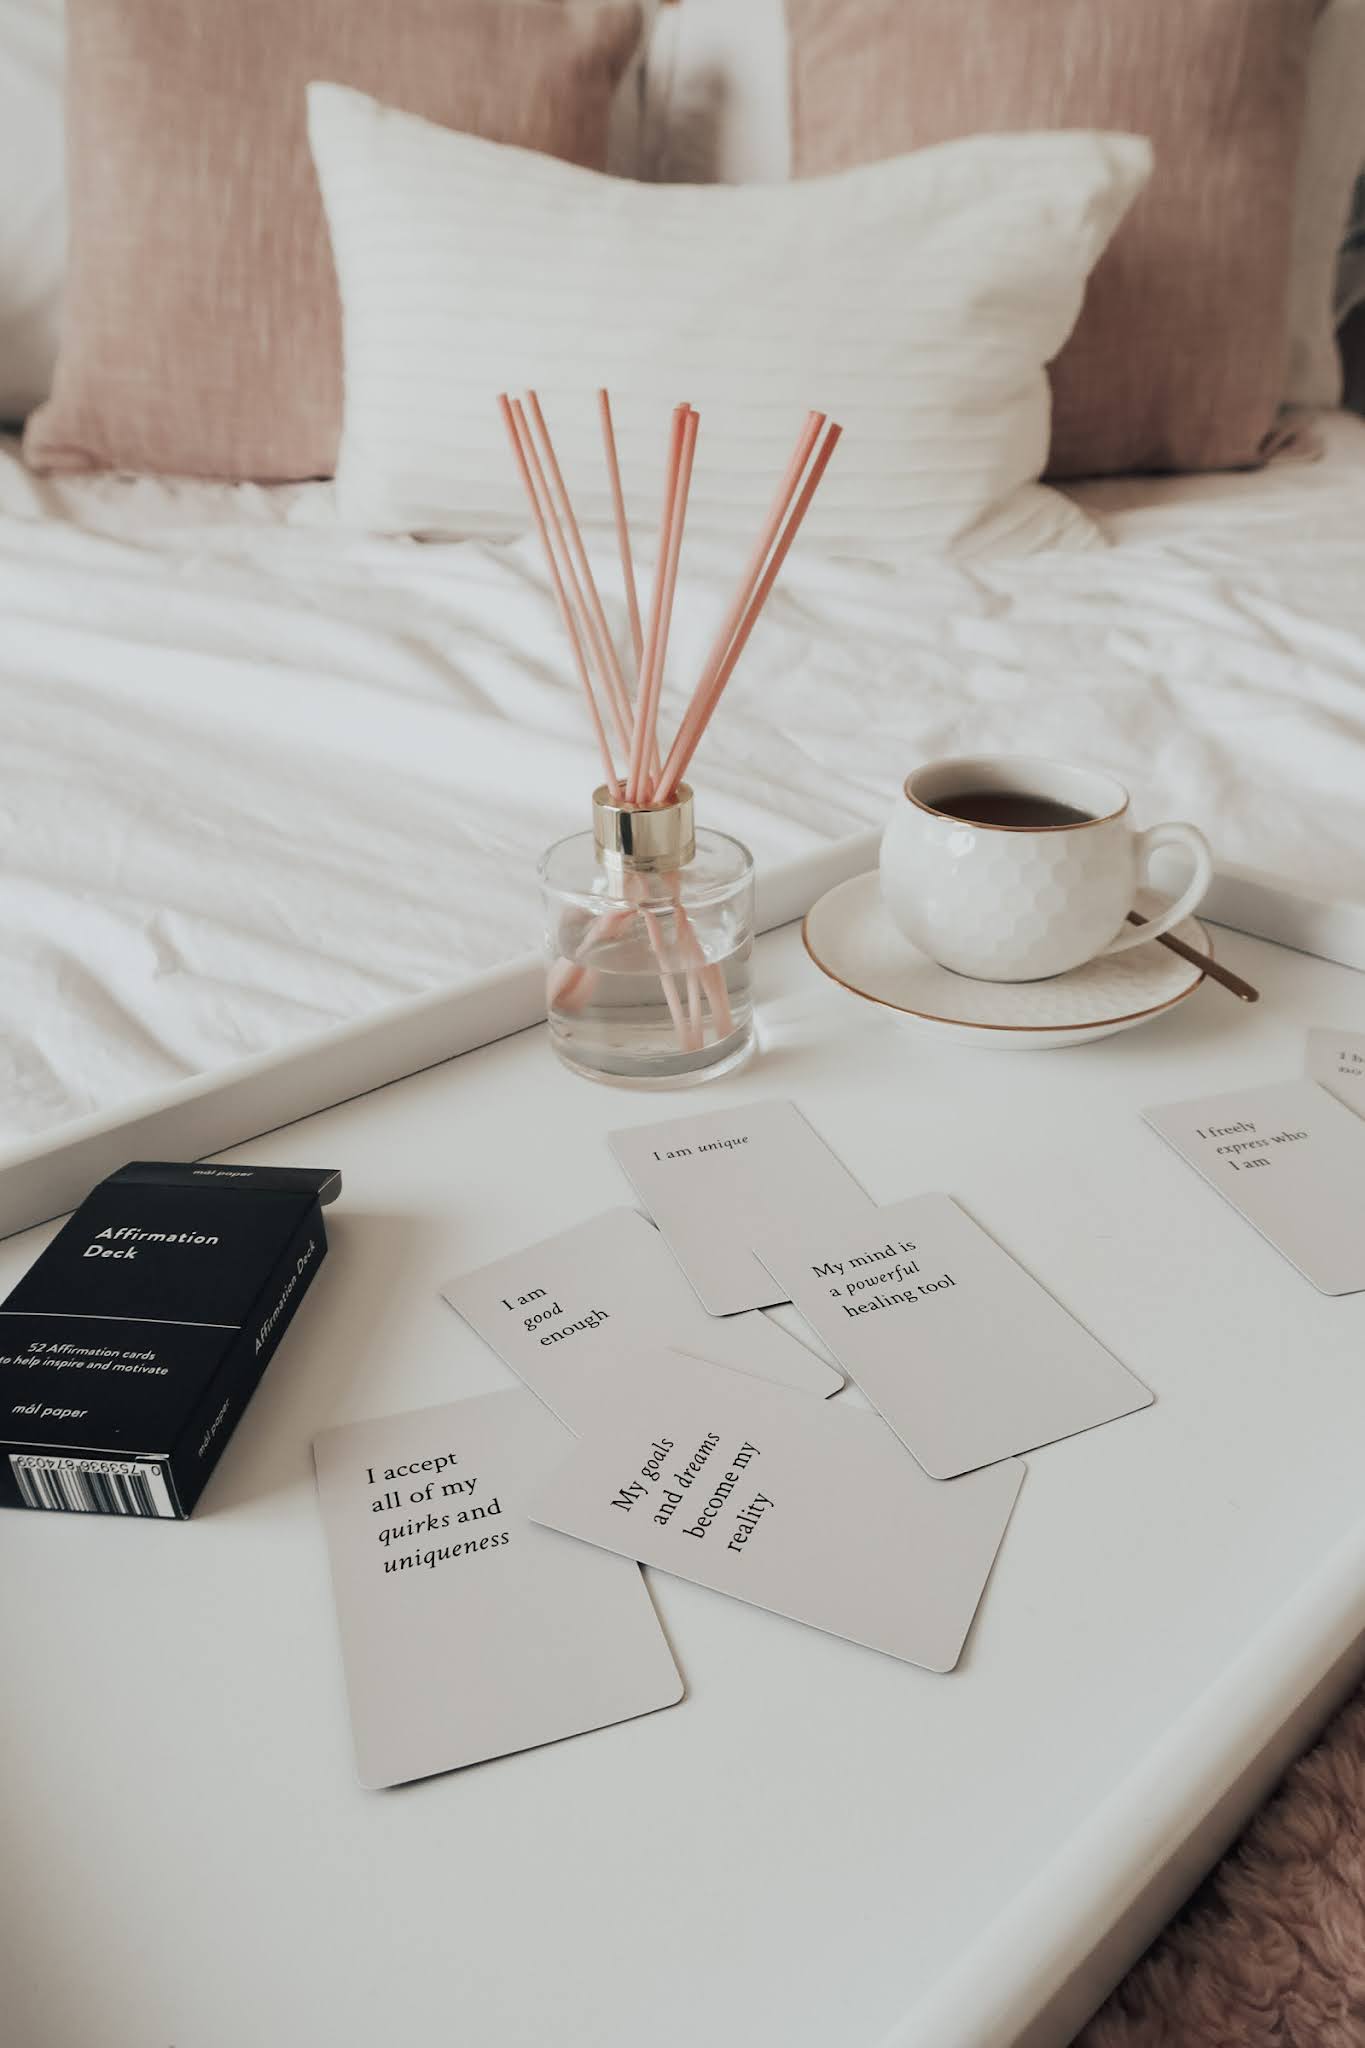 Splayed white affirmation cards on a white tray.